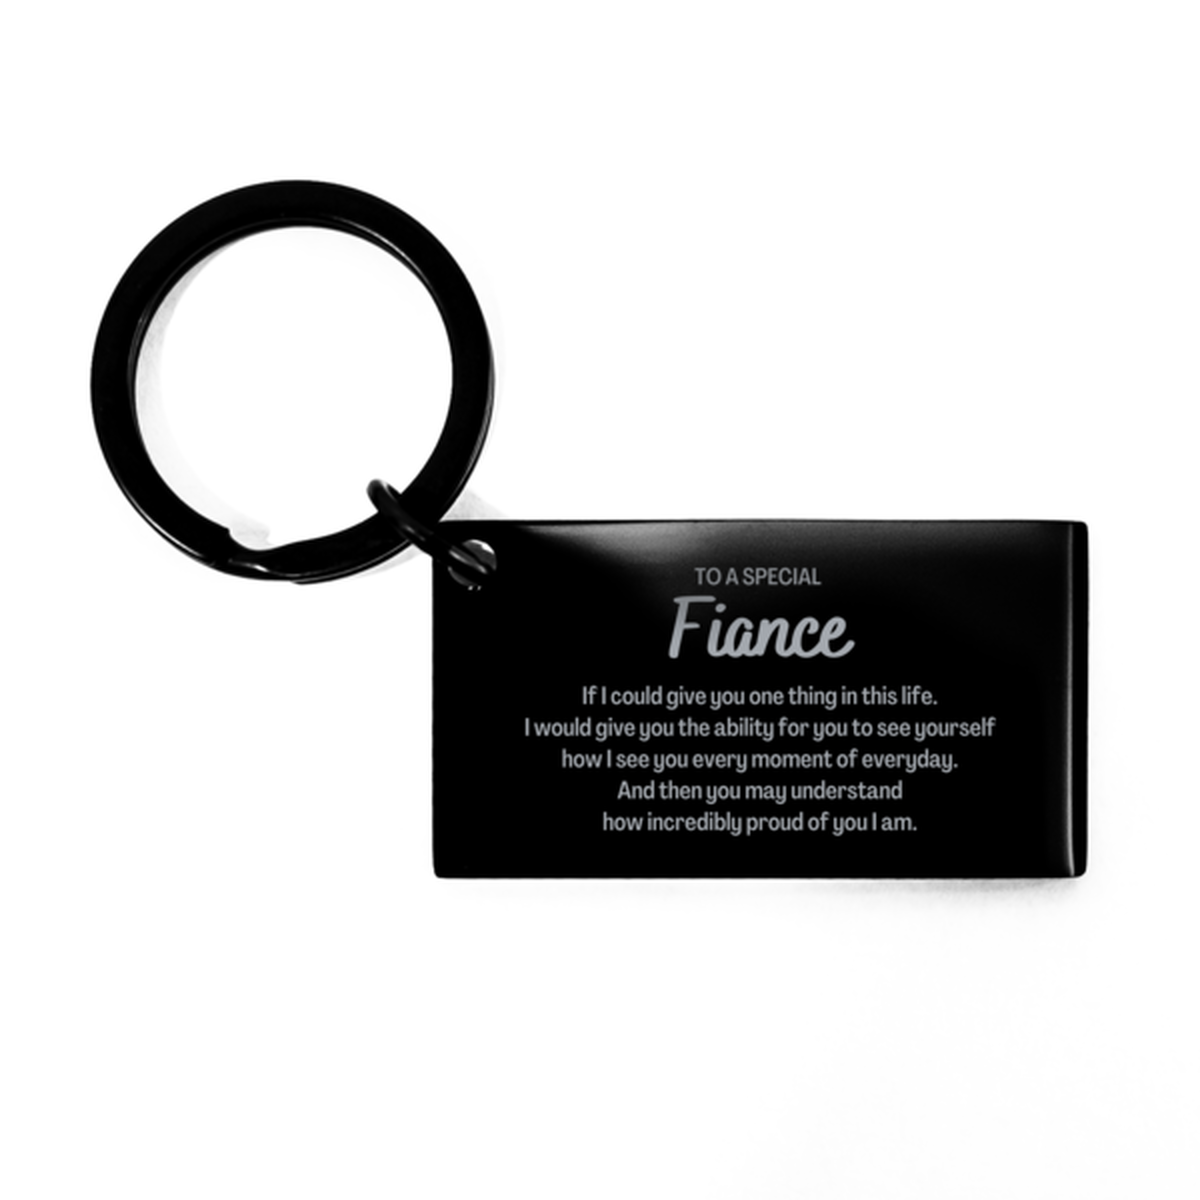 To My Fiance Keychain, Gifts For Fiance Engraved, Inspirational Gifts for Christmas Birthday, Epic Gifts for Fiance To A Special Fiance how incredibly proud of you I am